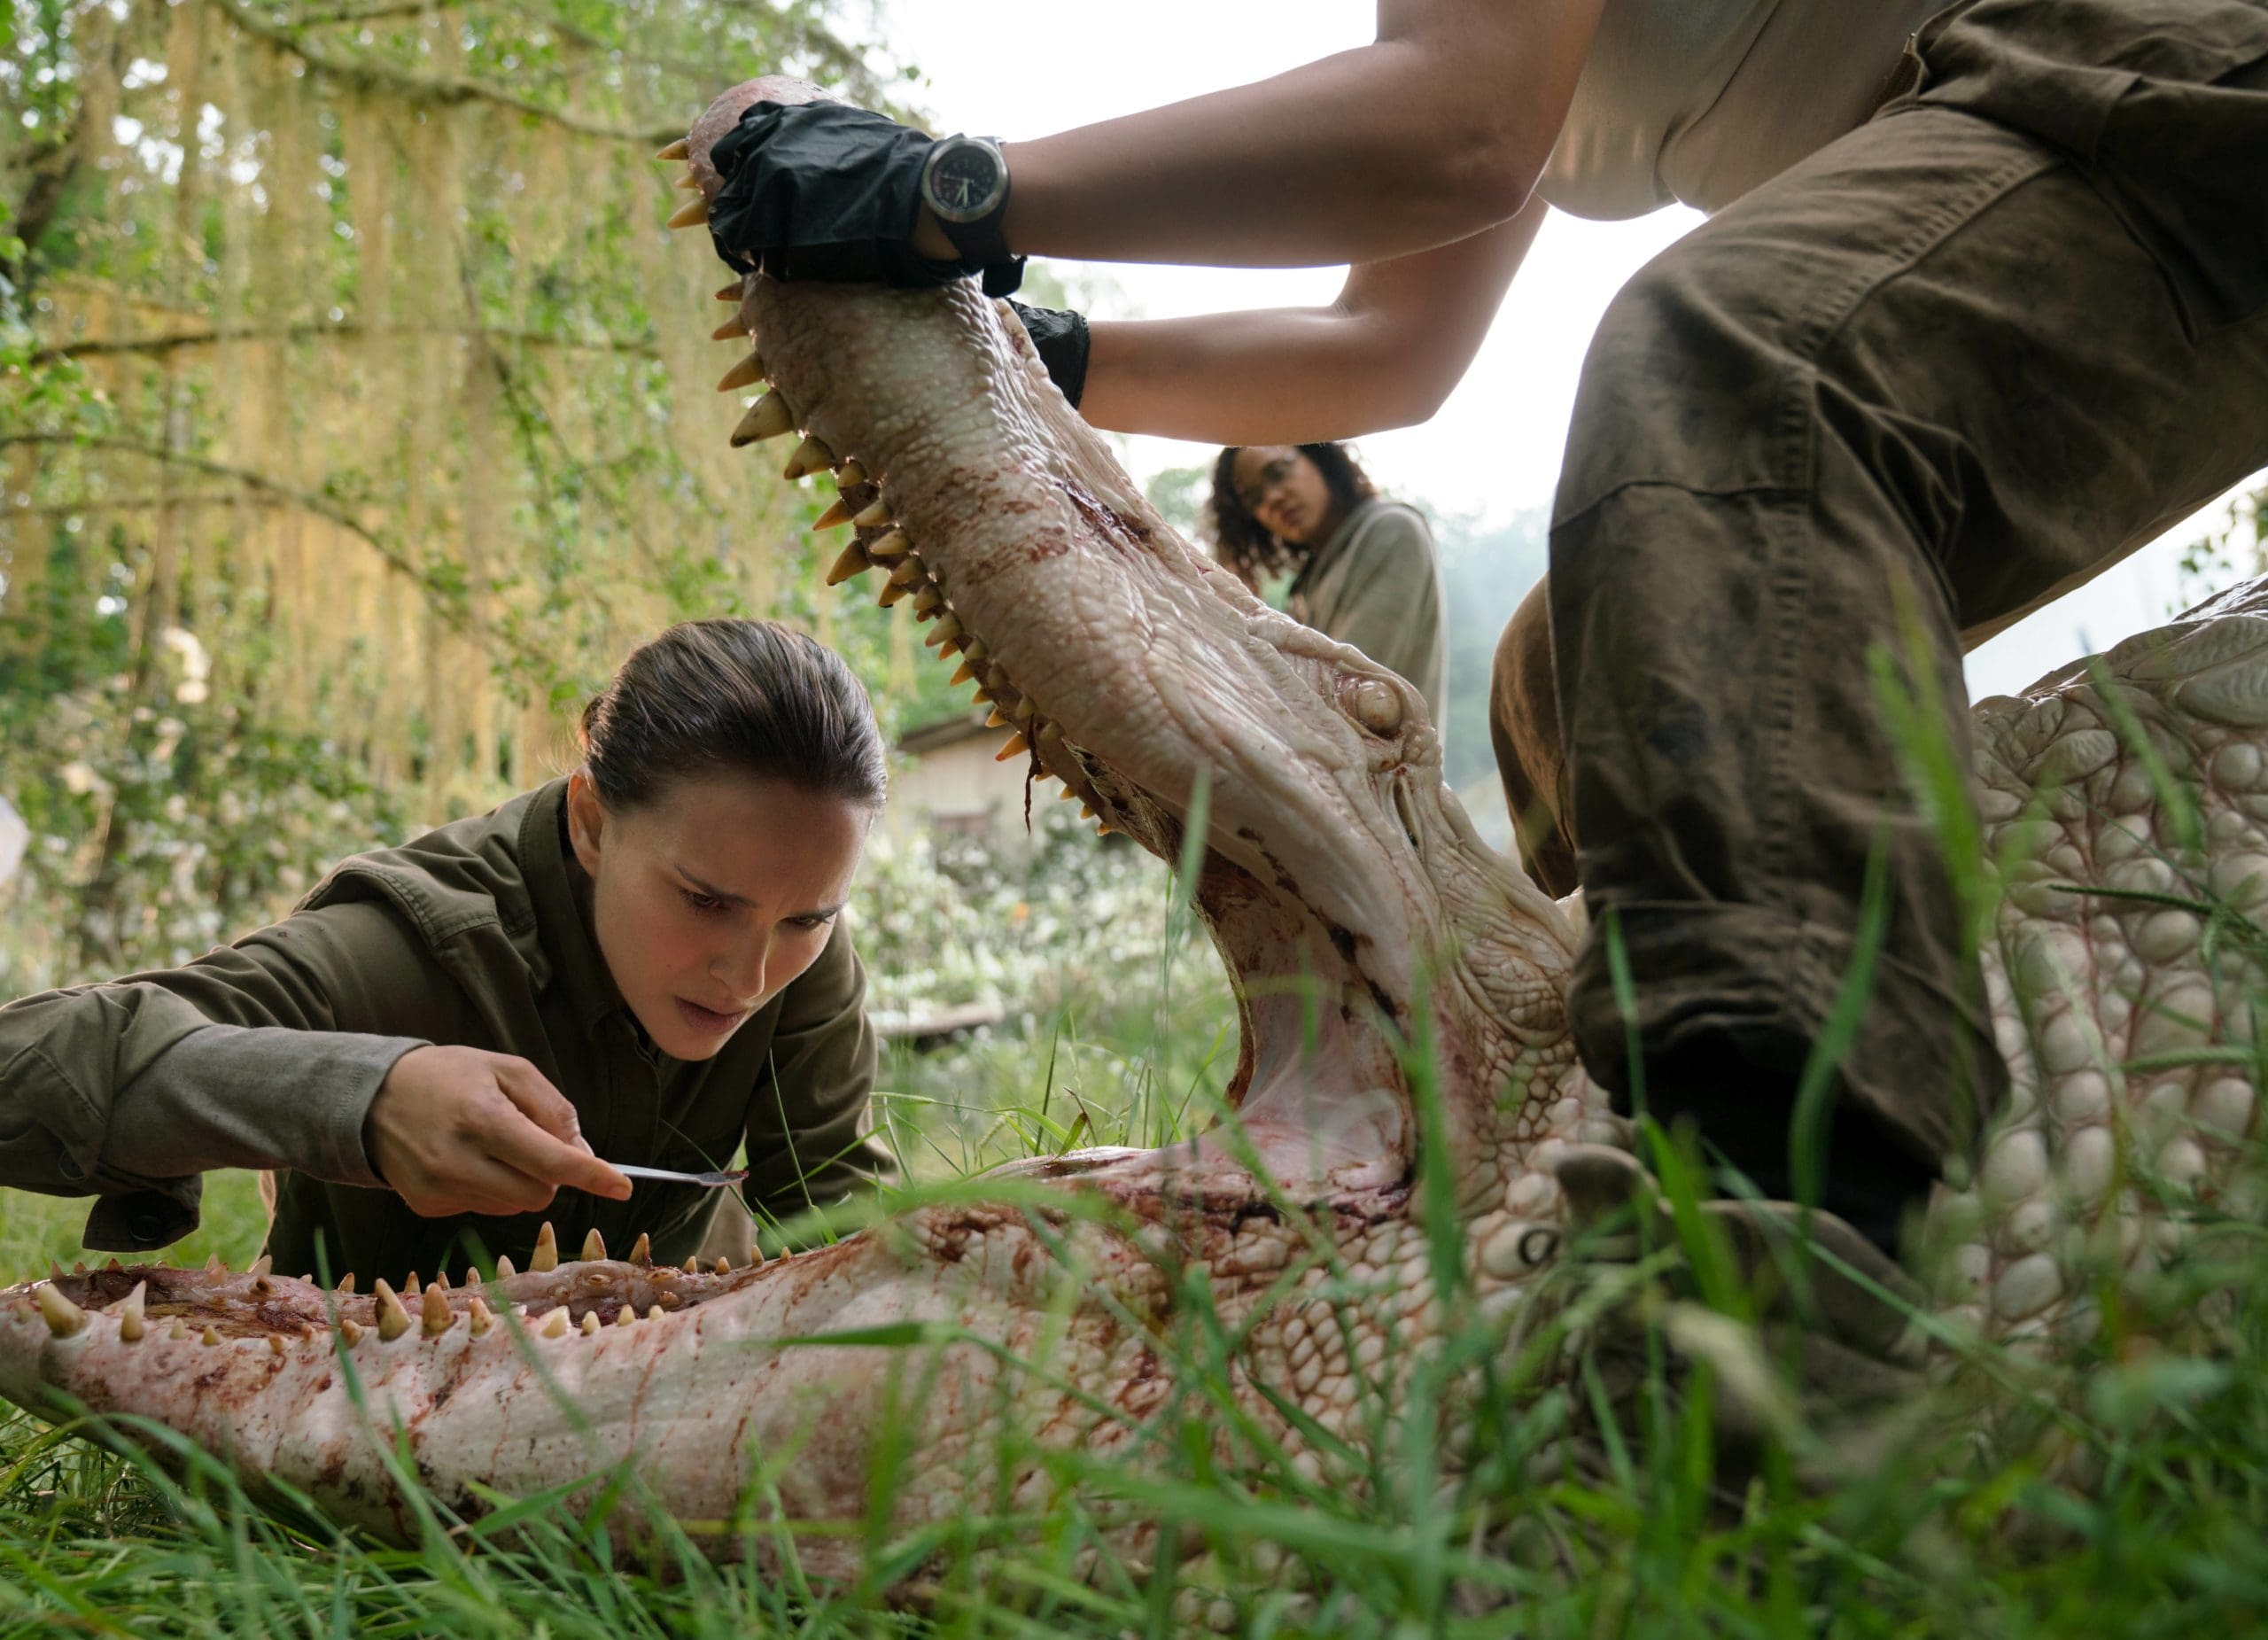 Left to right: Natalie Portman and Tessa Thompson in ANNIHILATION, from Paramount Pictures and Skydance.